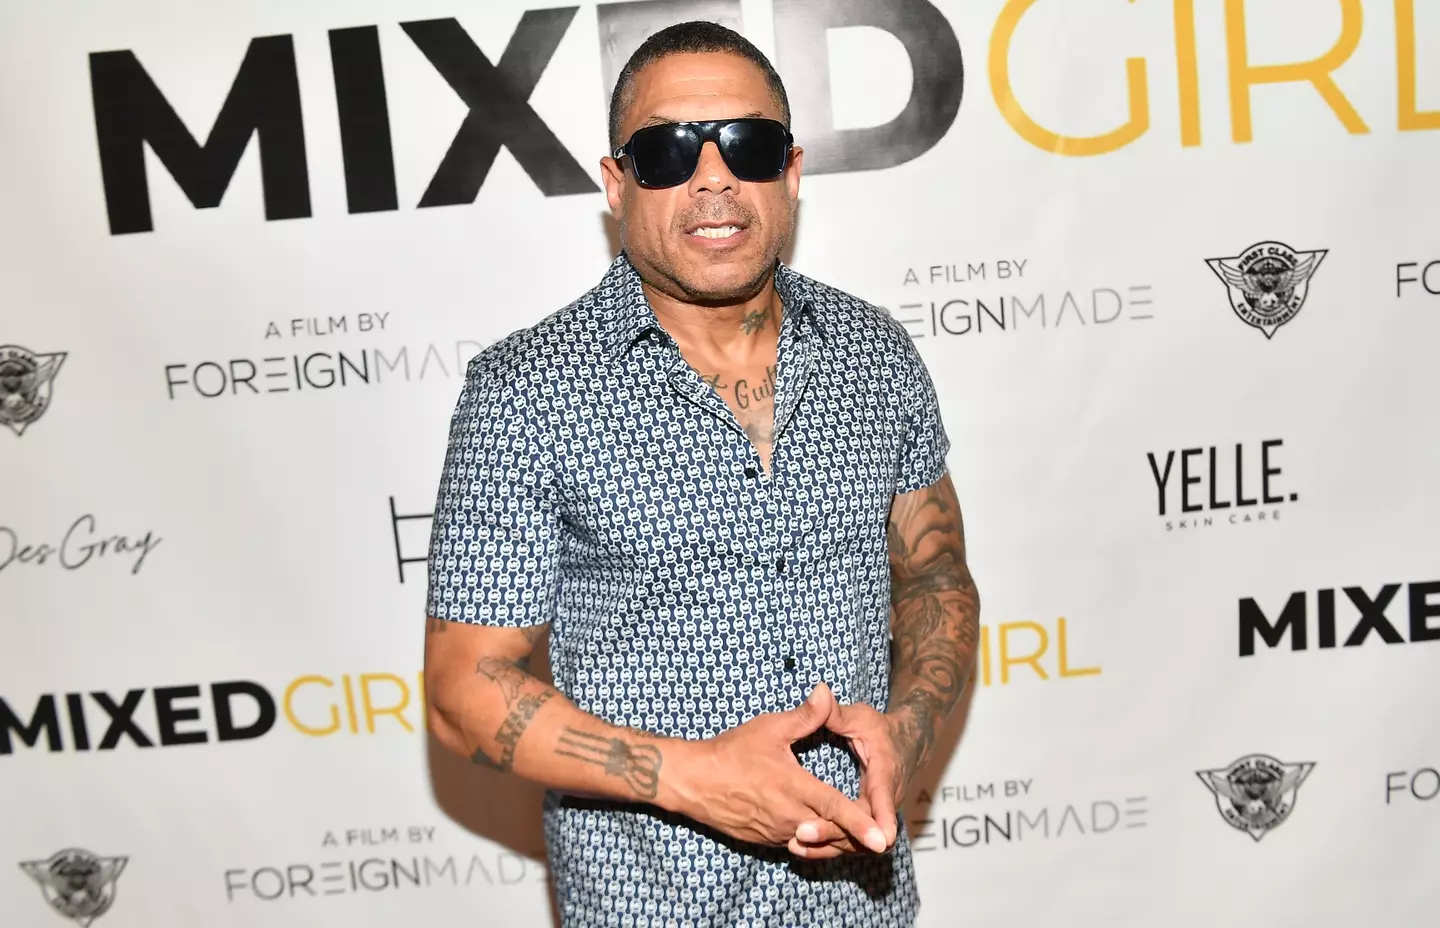 Benzino and Eminem have released diss tracks about one another.